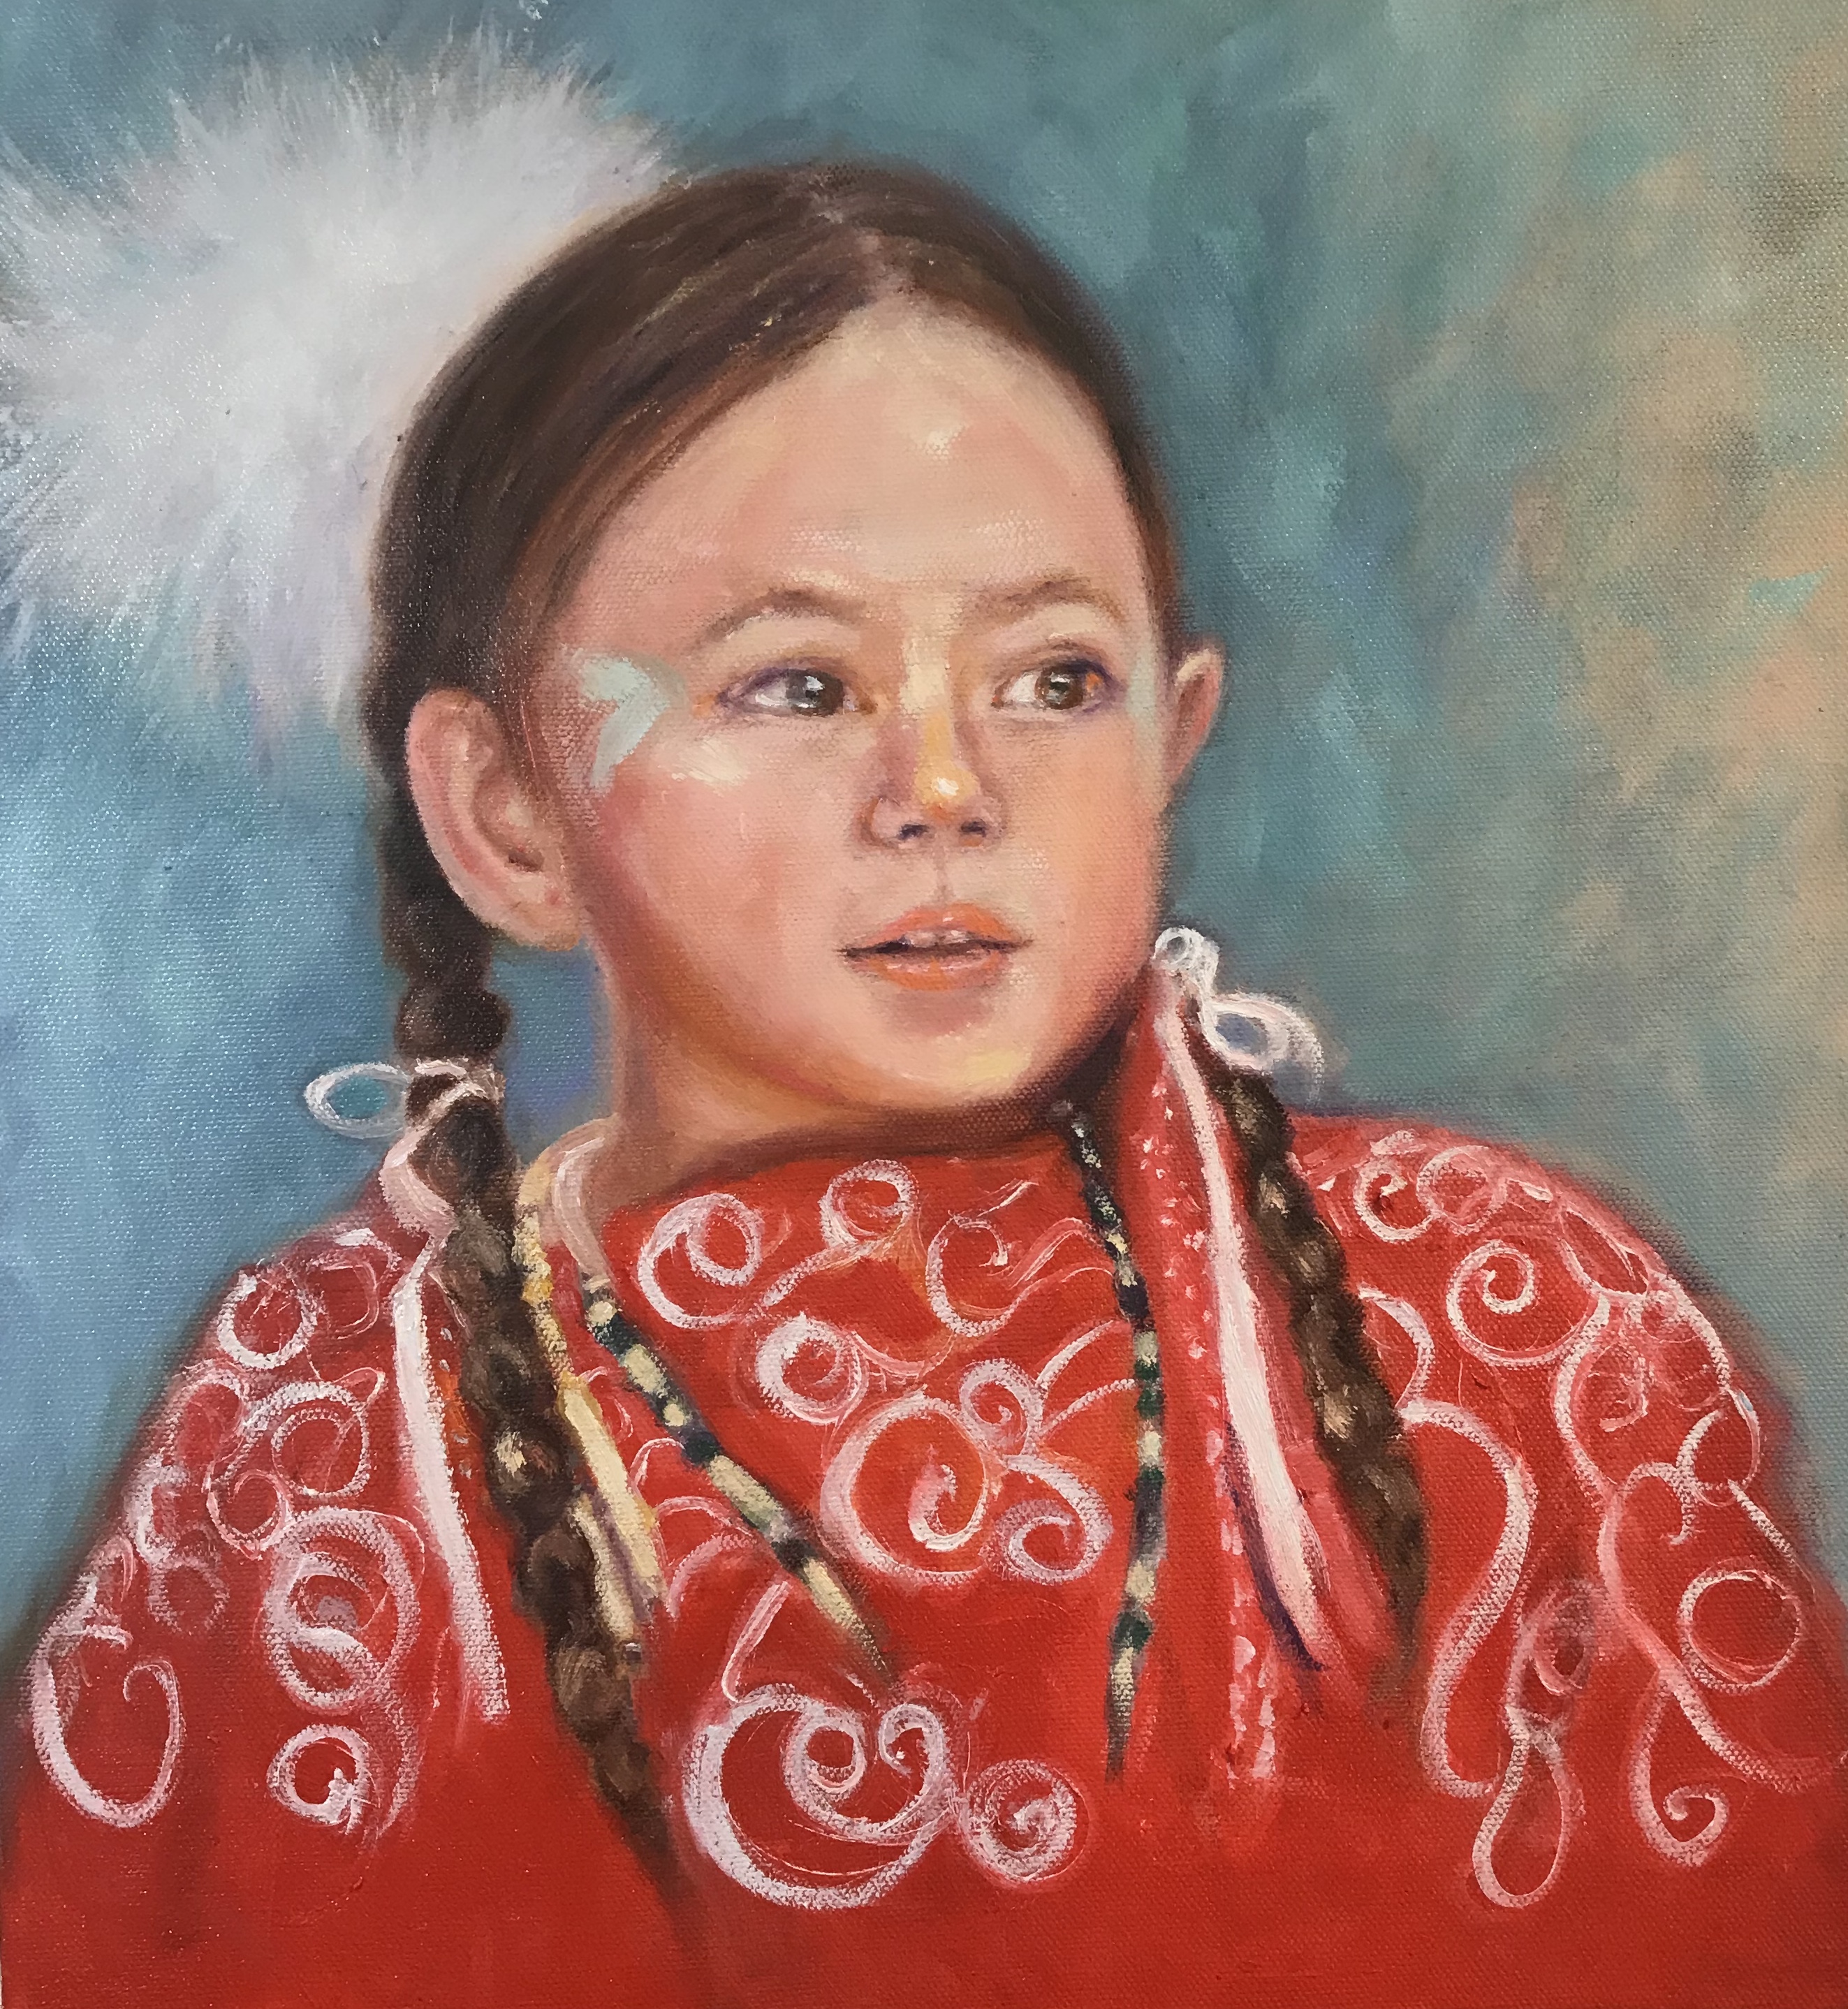 YOUNG NATIVE GIRL